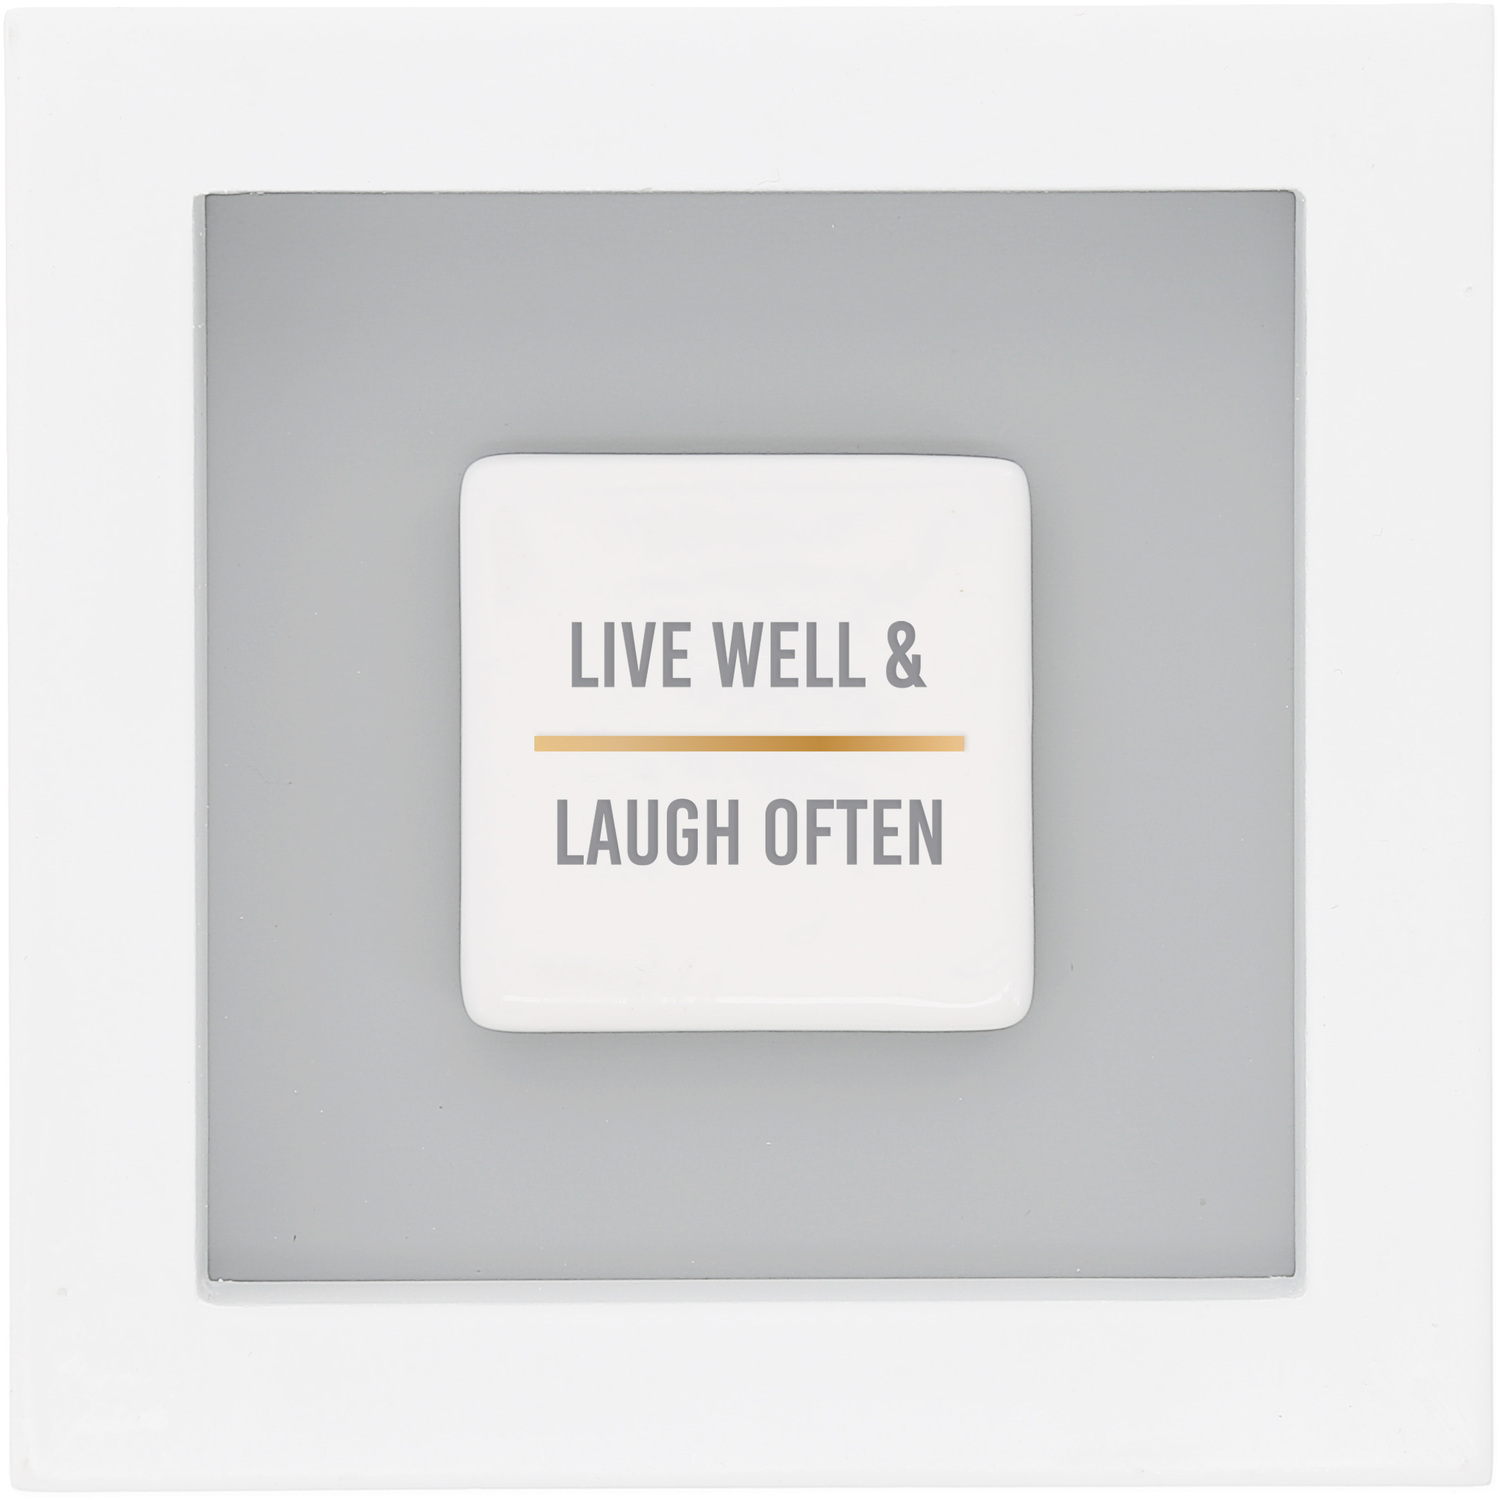 Laugh Often by Said with Love - Laugh Often - 4.75" Plaque